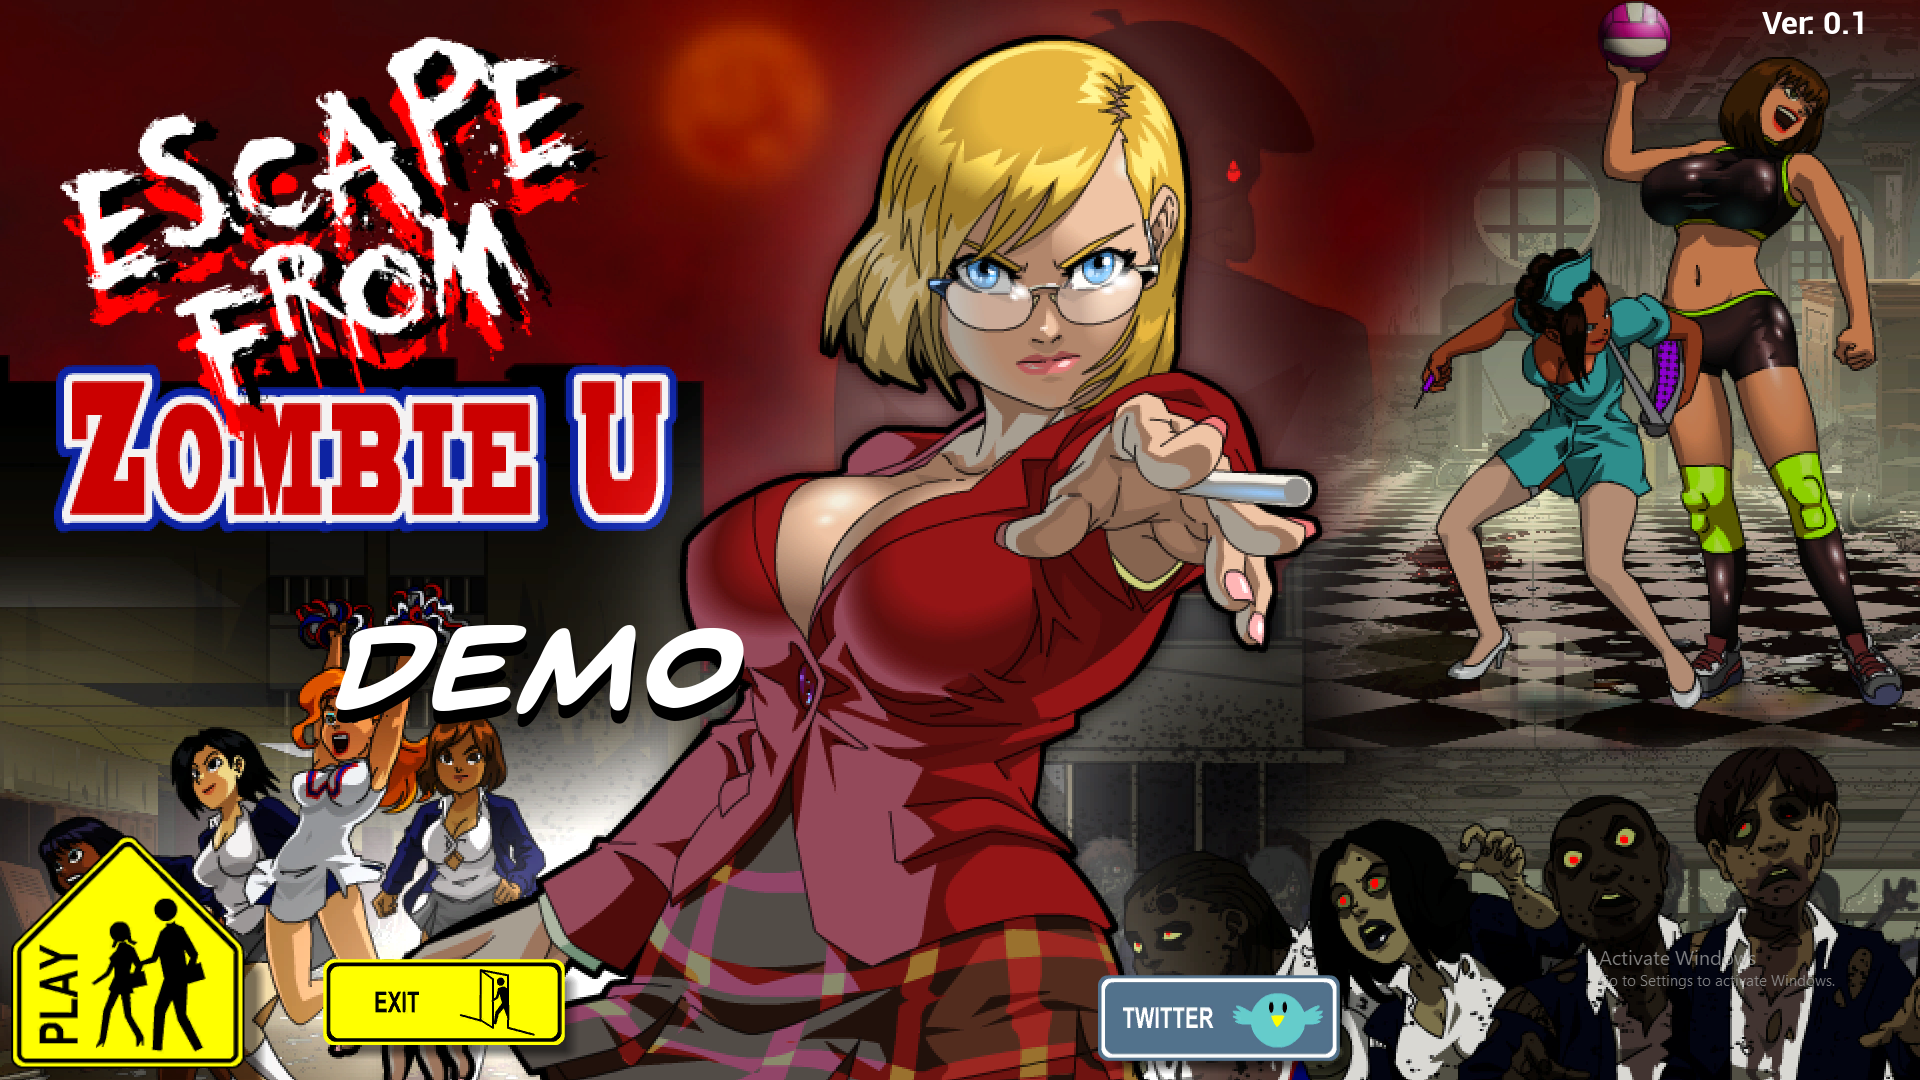 Zombie Hentai Porn Free - Adultgamesworld: Free Porn Games & Sex Games Â» Escape From Zombie  U:reloaded â€“ New Version 0.2.0 [SodaAnimations]